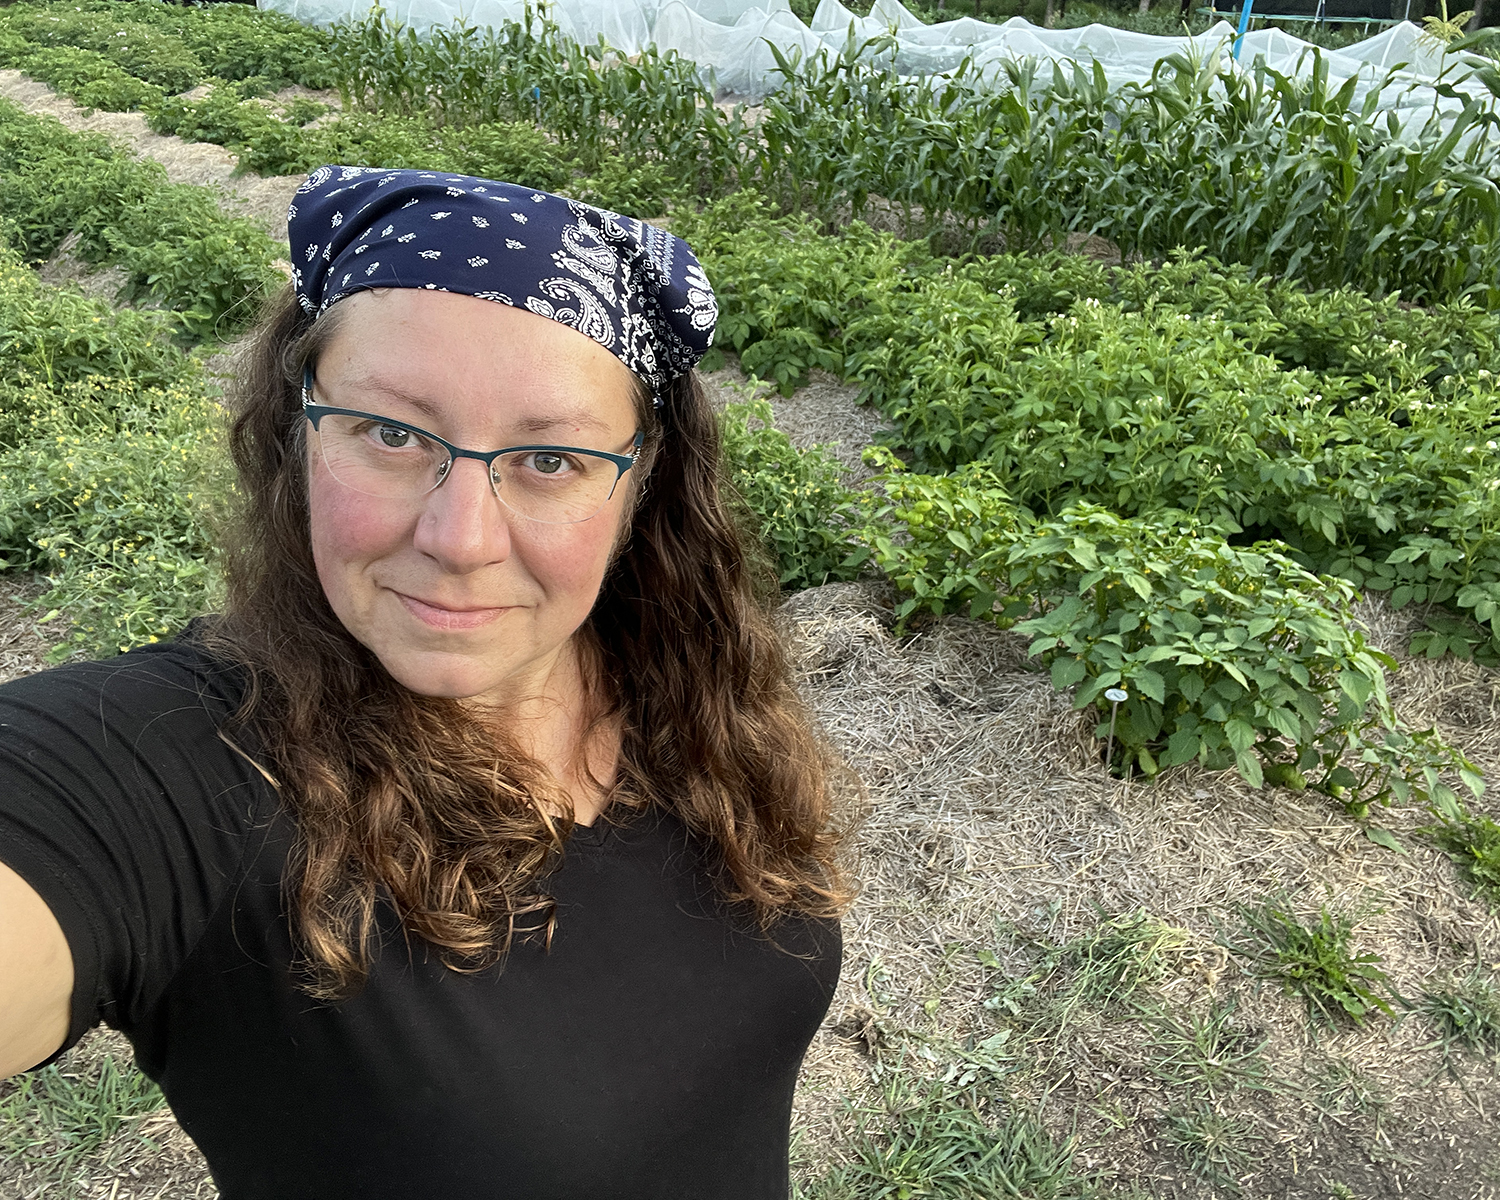 Kim Ross wearing a bandana and a black shirt smiling up at the camera from beside her no-till garden beds in summer time